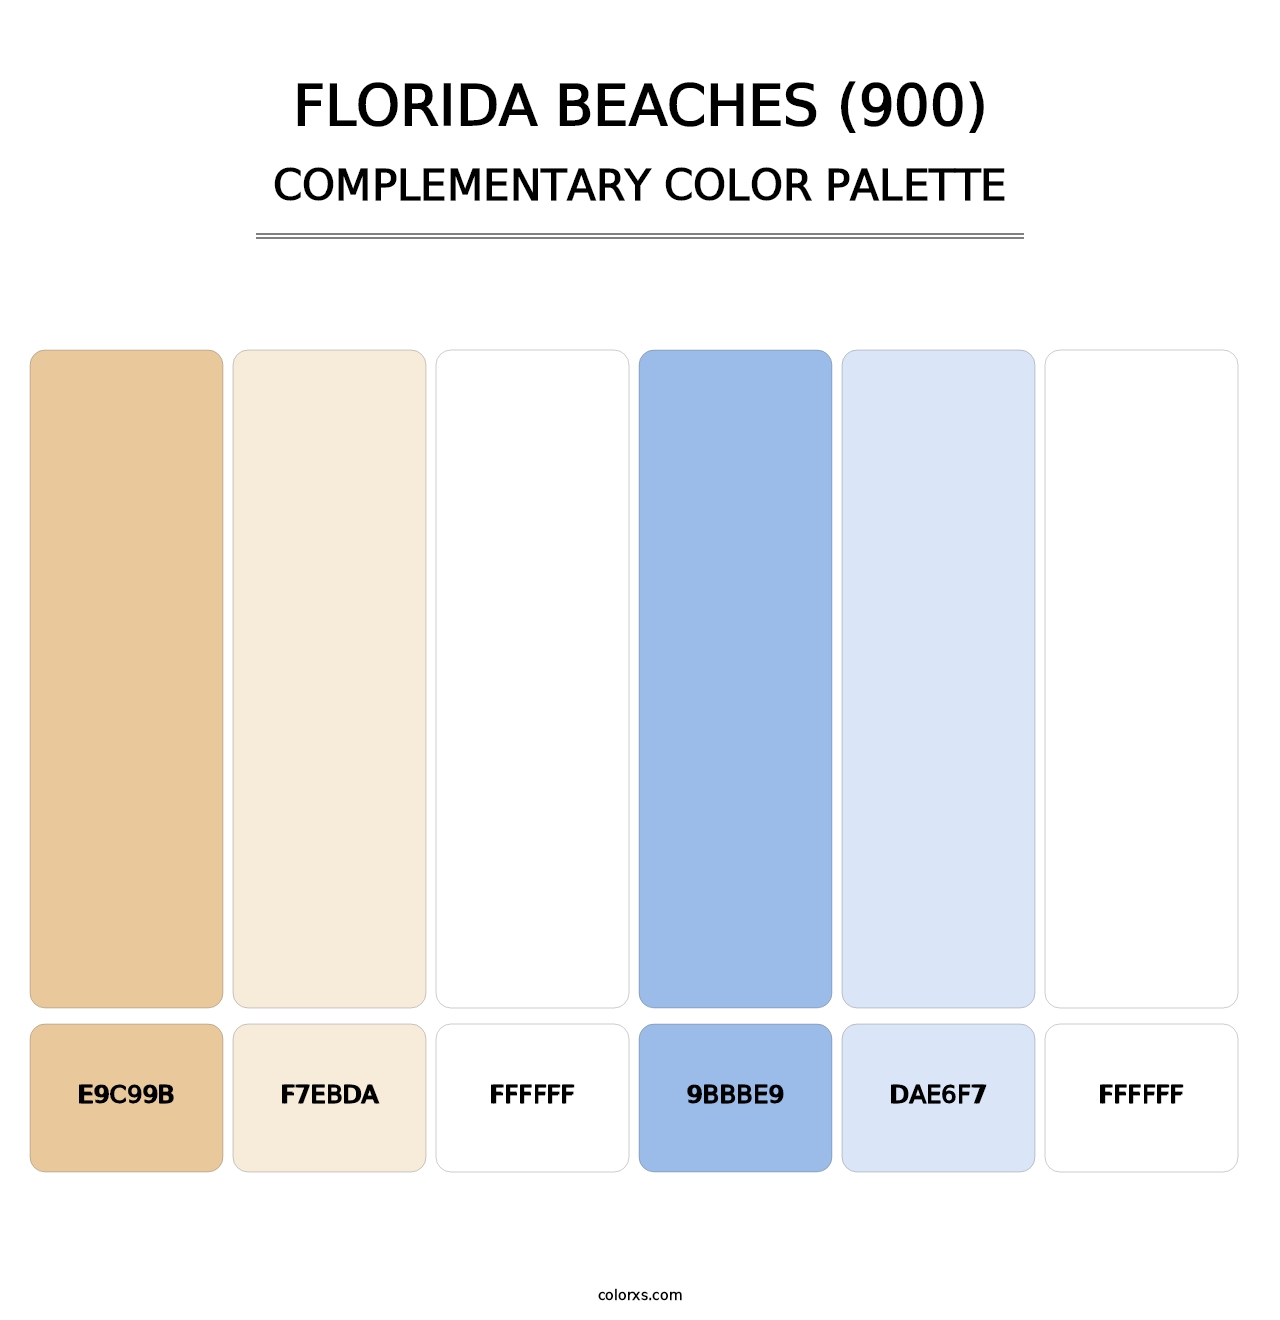 Florida Beaches (900) - Complementary Color Palette